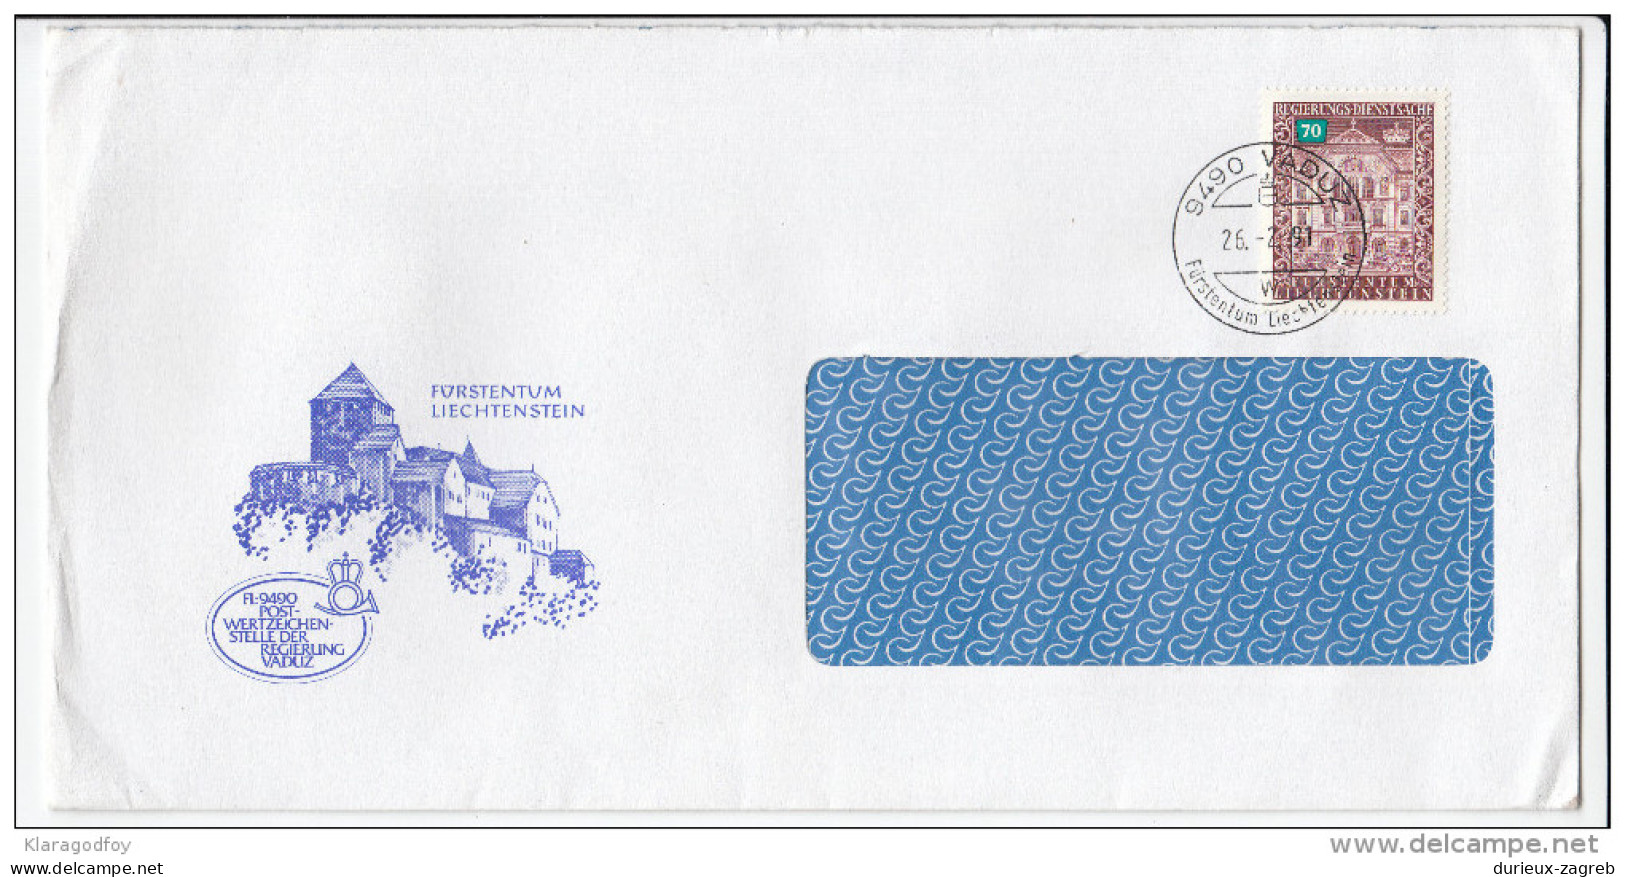 Liechtenstein Official Letter Cover Travelled 1991 Bb160108 - Covers & Documents